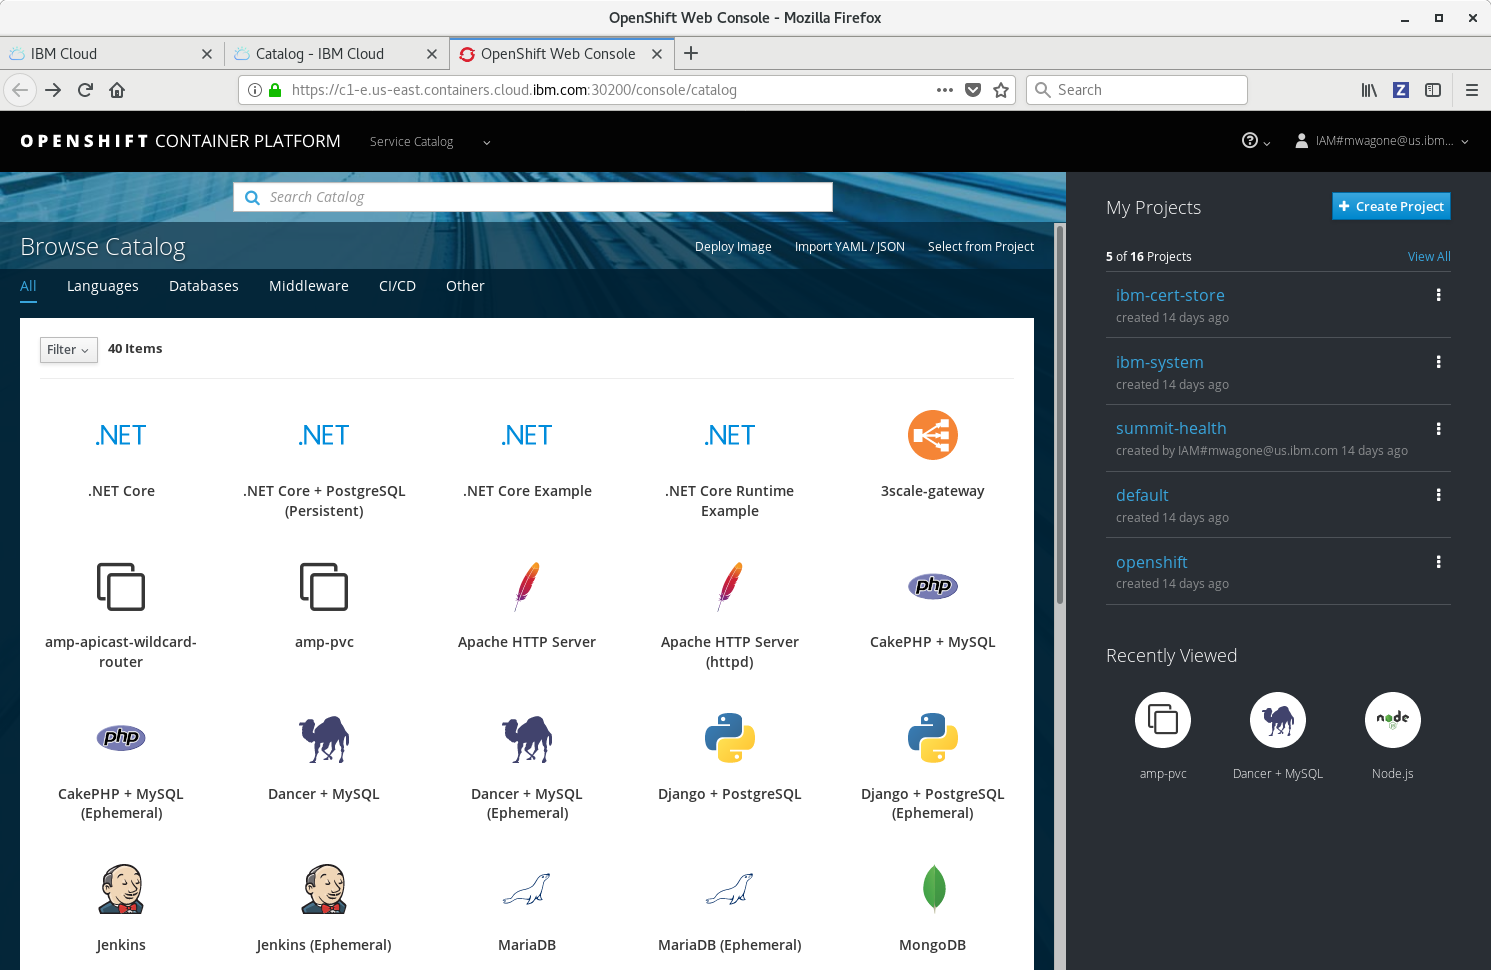 Screen capture of the service catalog in the Red Hat OpenShift web console